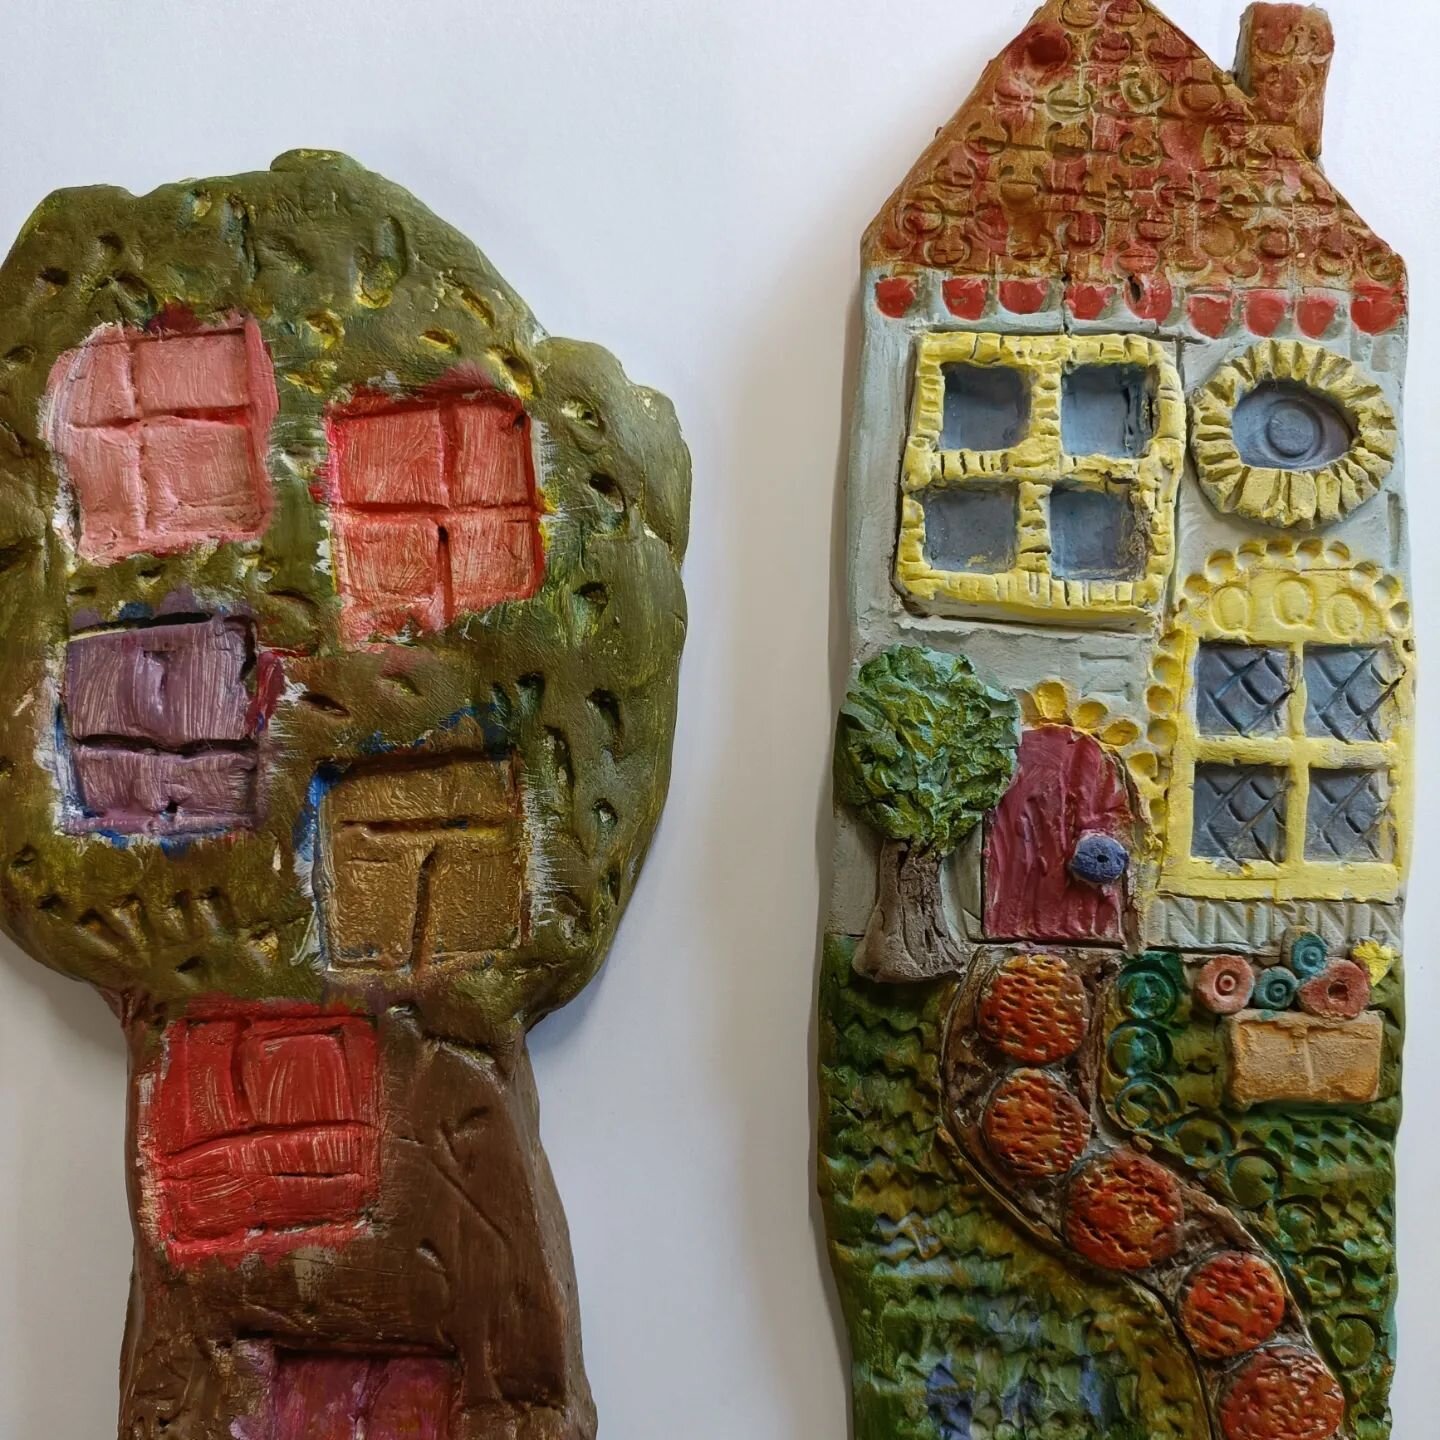 Last week our young artists developed their clay work with colour washes  to bring their house and homes to life. 

The artists were free to develop their personal  imaginative ideas. Who doesn't want to live in a tree  house or an abode made out of 